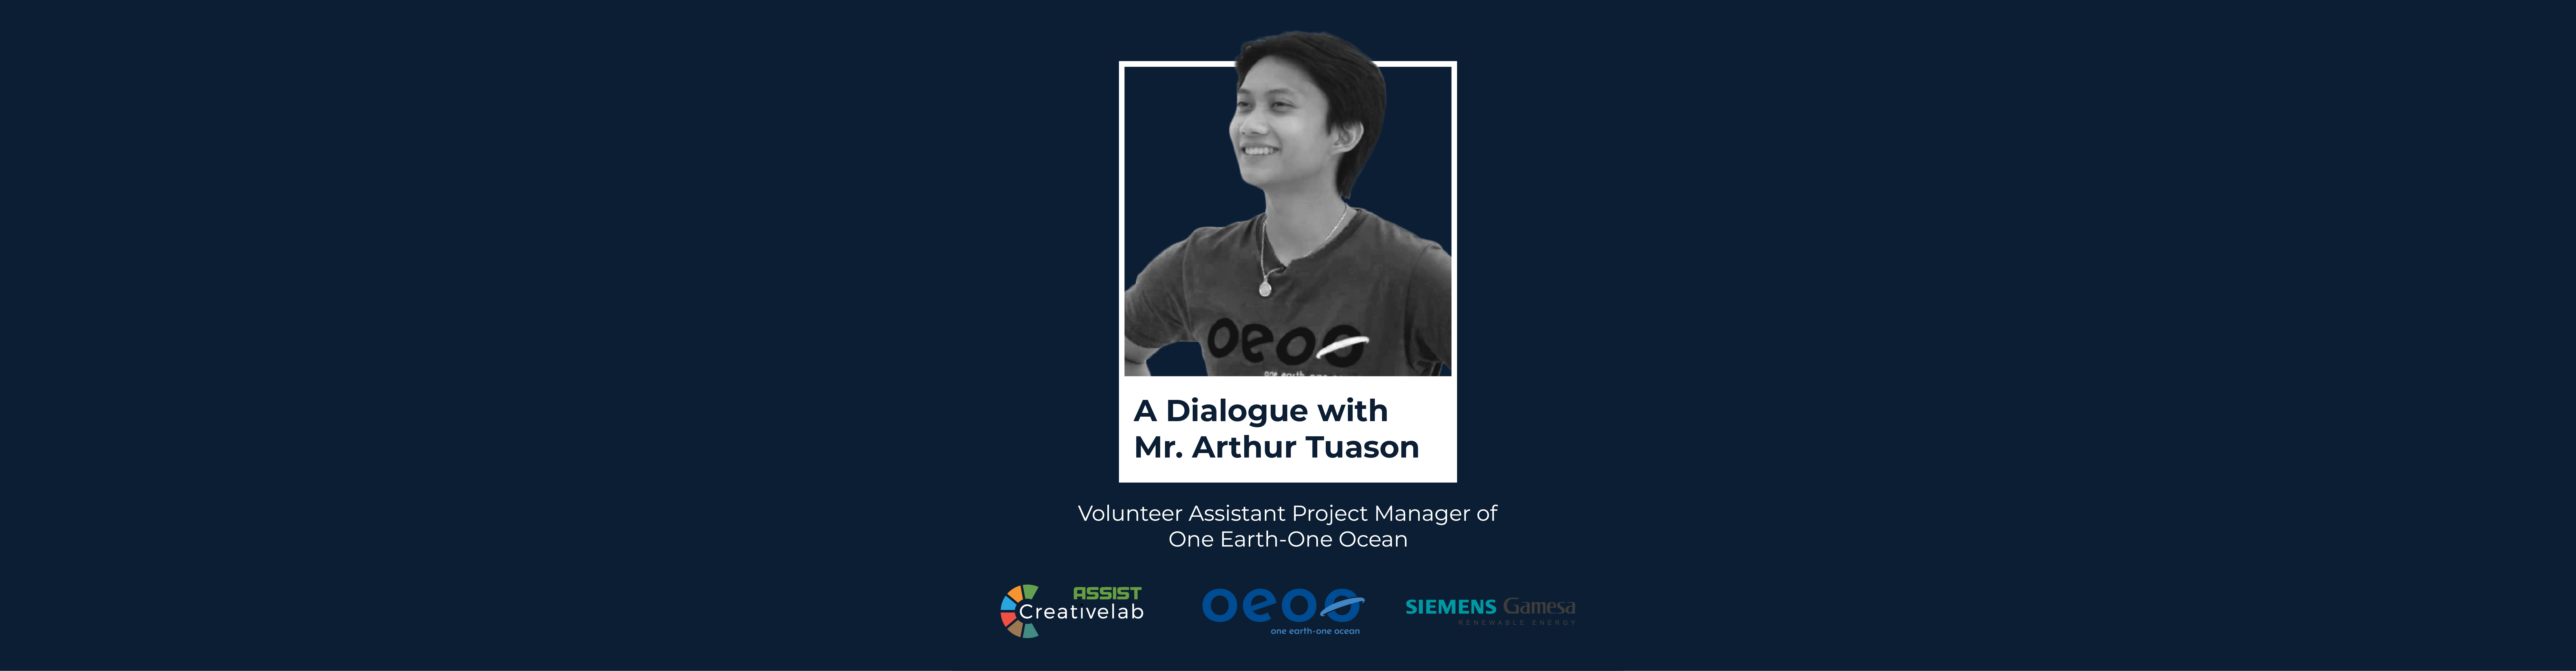 A Dialogue with Mr. Arthur Tuason, Volunteer Assistant Project Manager of One Earth-One Ocean